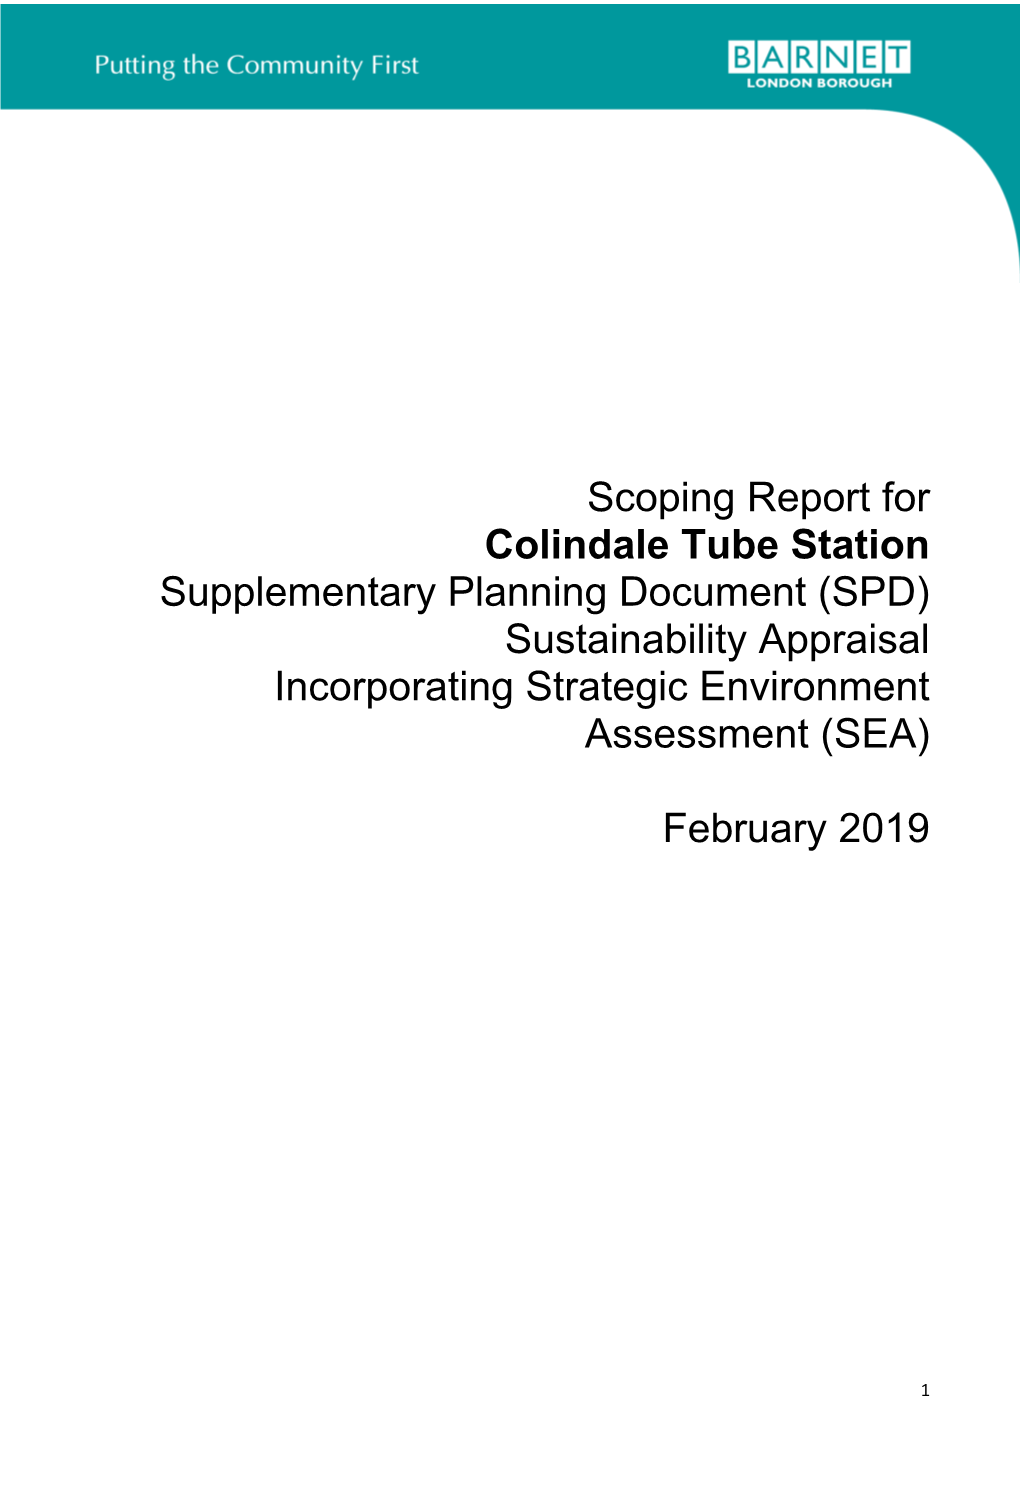 Scoping Report for Colindale Tube Station Supplementary Planning Document (SPD) Sustainability Appraisal Incorporating Strategic Environment Assessment (SEA)